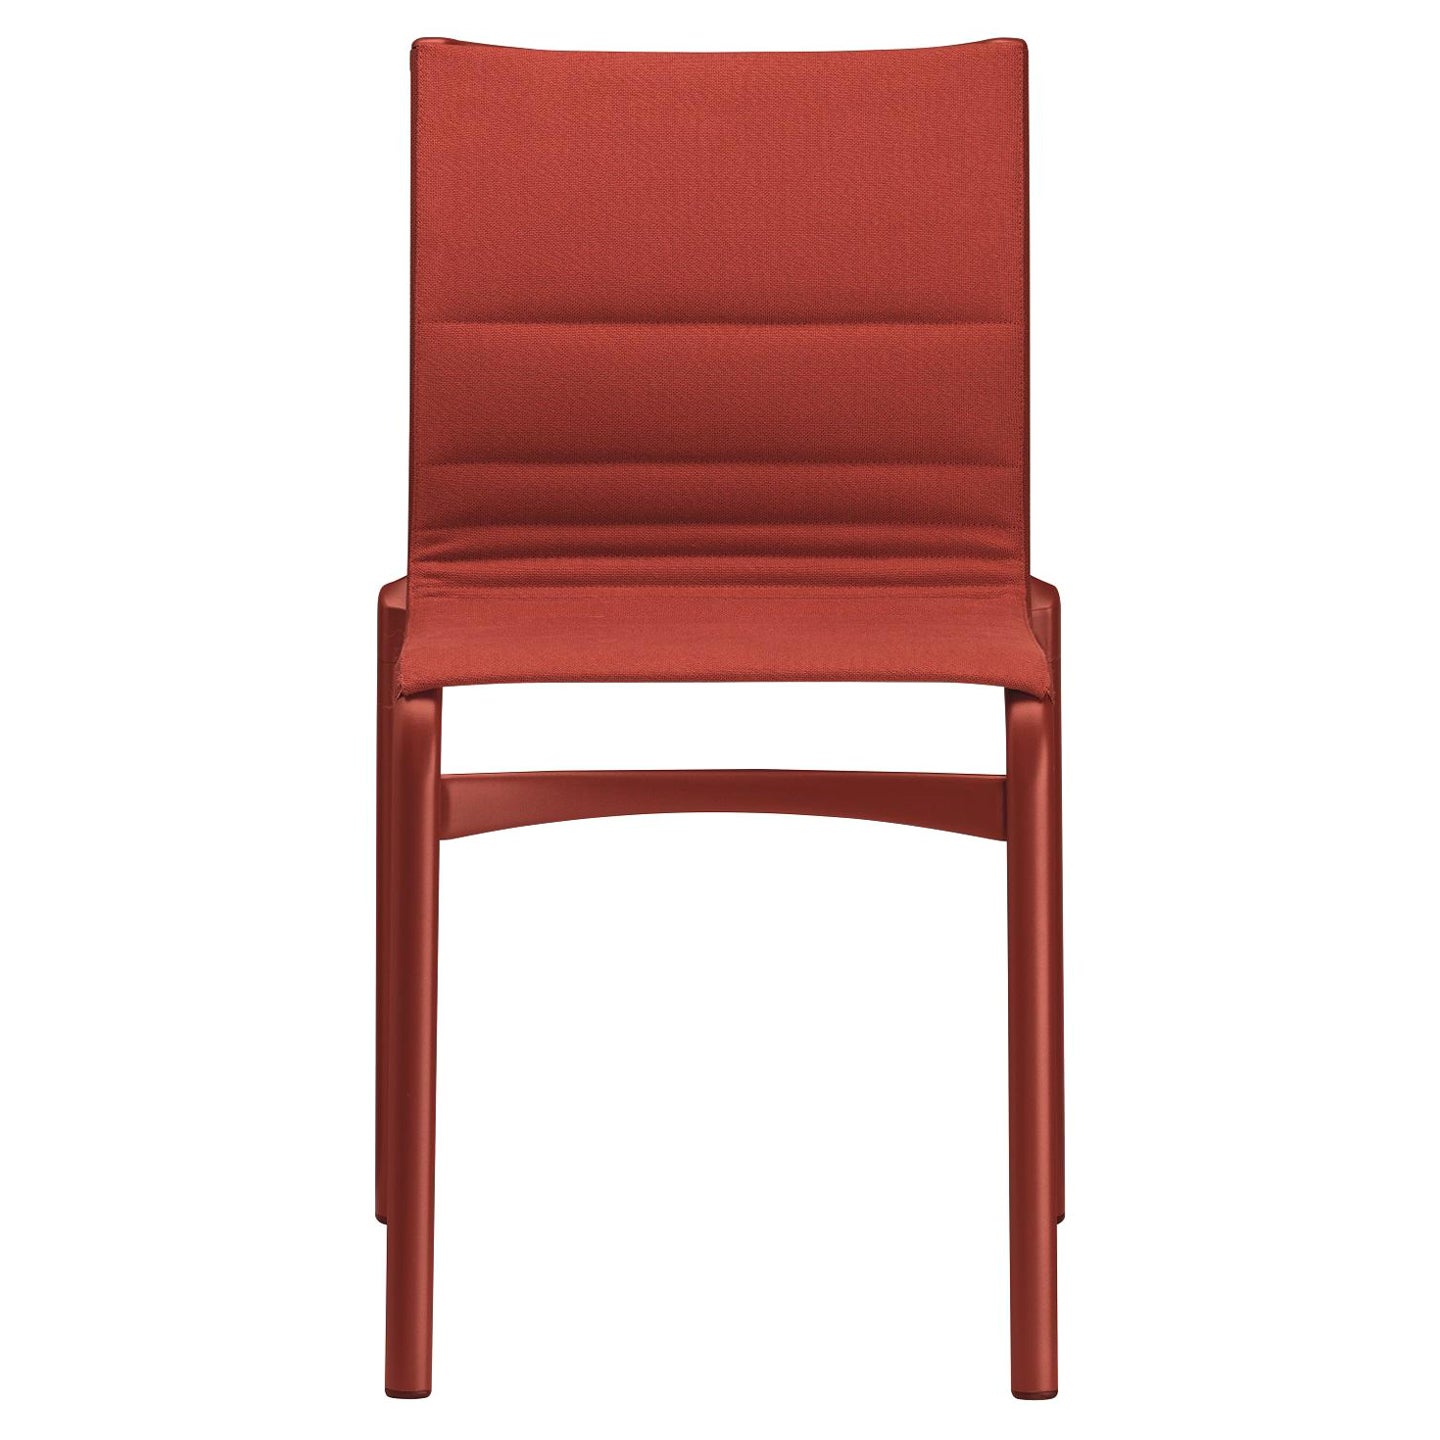 Alias Bigframe 44 Chair in Red HG06 Upholstery with Lacquered Aluminium Frame For Sale